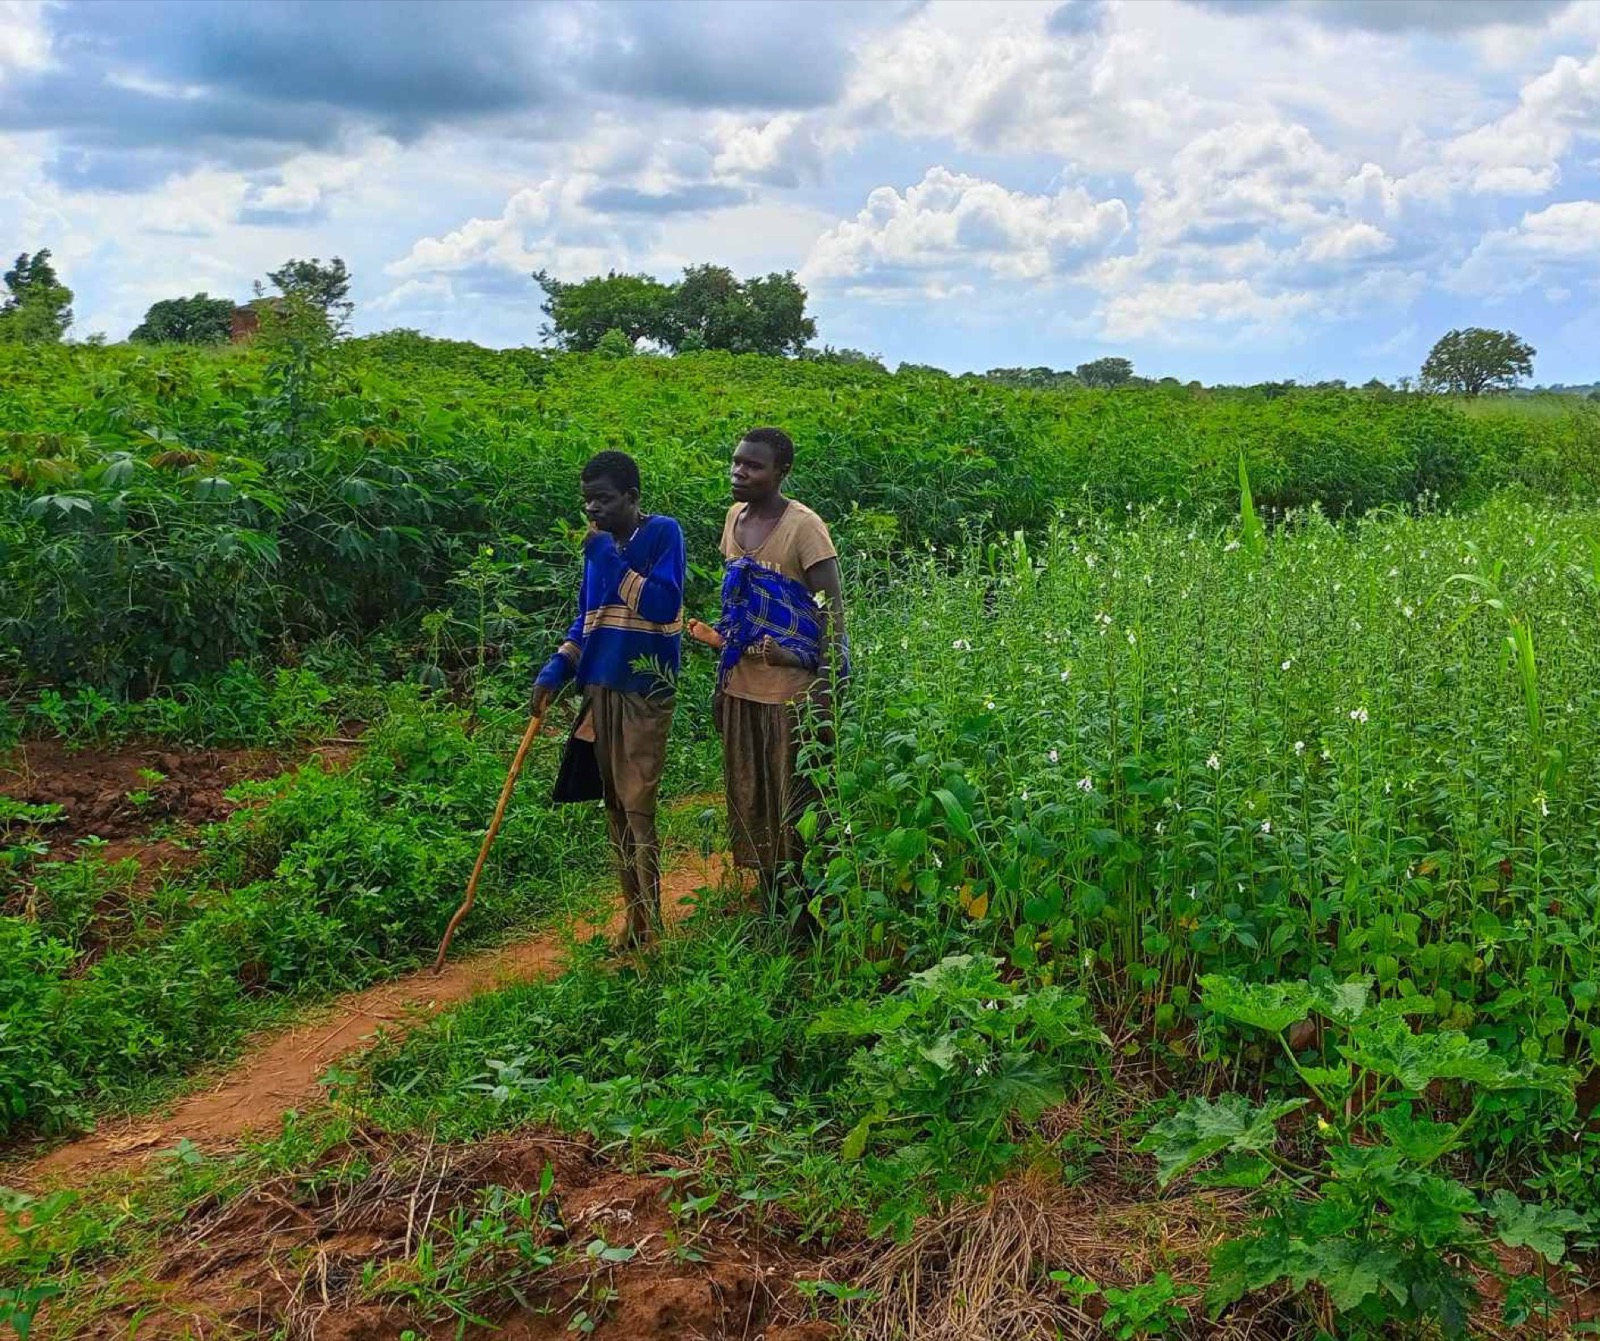 A picture of Alfred with his wife walking in the field. Alfred is a 35-year-old man with a disability and was selected by his community as a Farmer Innovator and was trained in the PIP approach (Integrated Farm Plan).